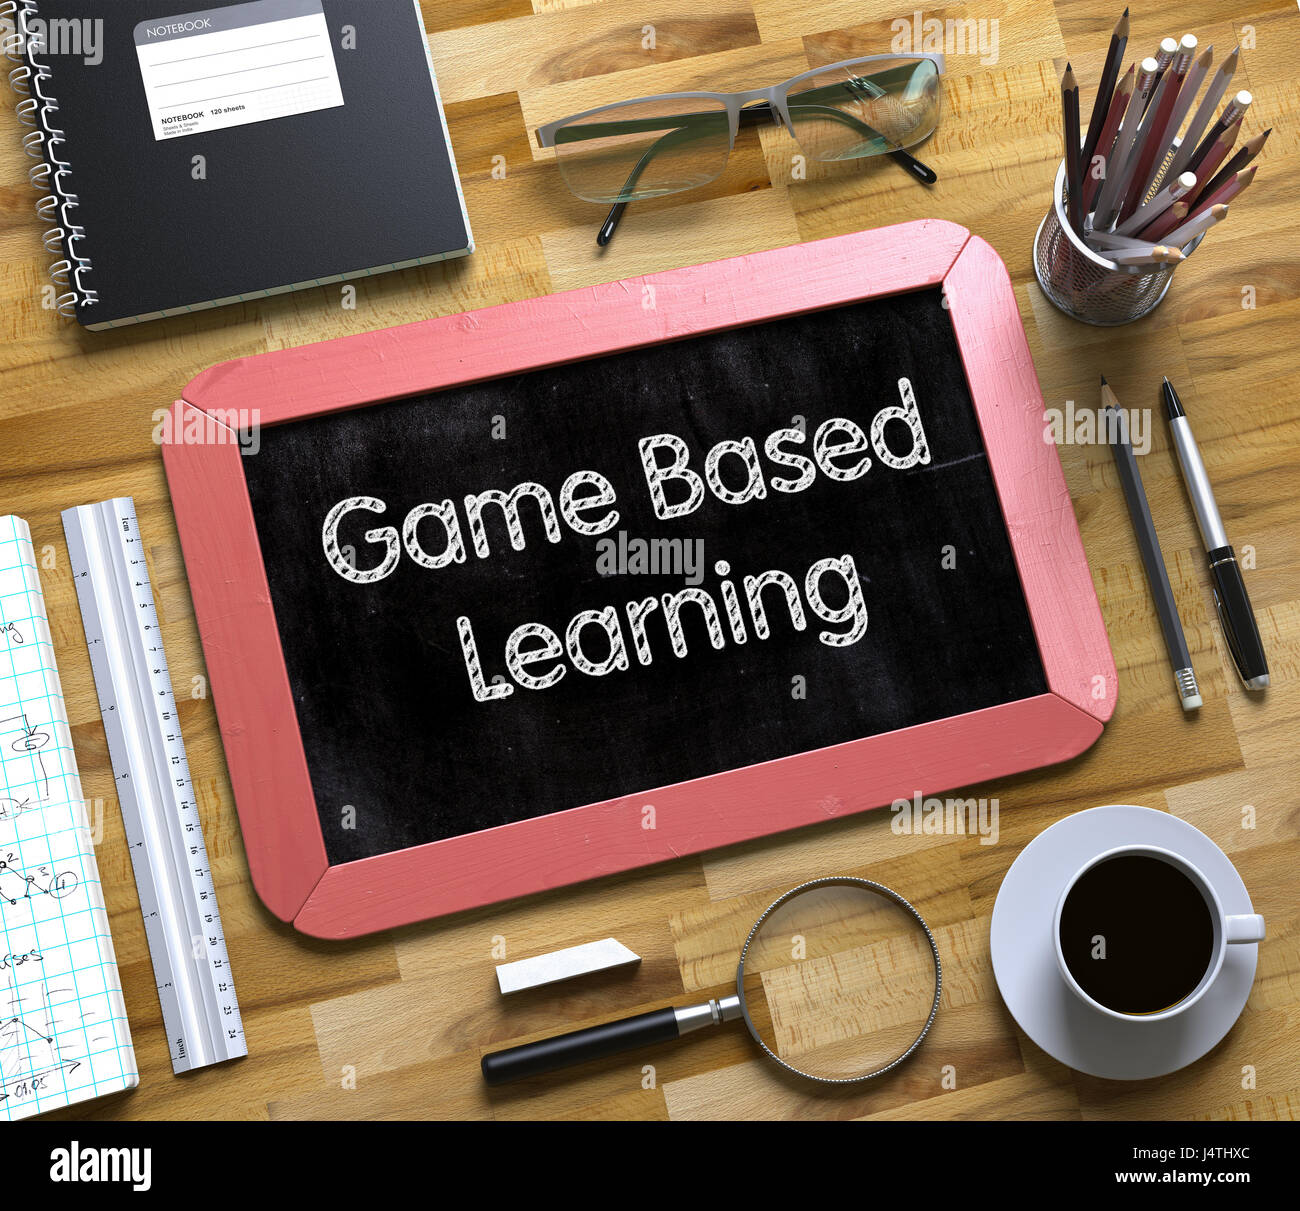 Game Based Learning Handwritten on Small Chalkboard. 3d. 3D. Stock Photo